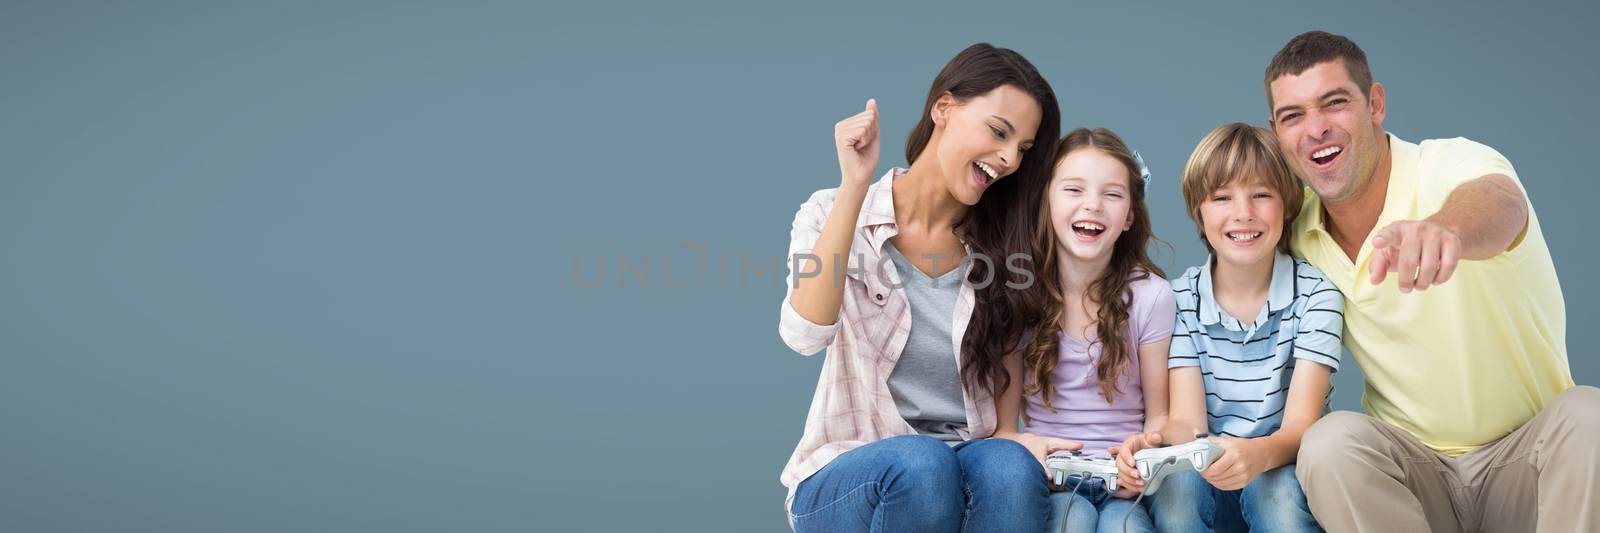 Family having fun together with blank background by Wavebreakmedia